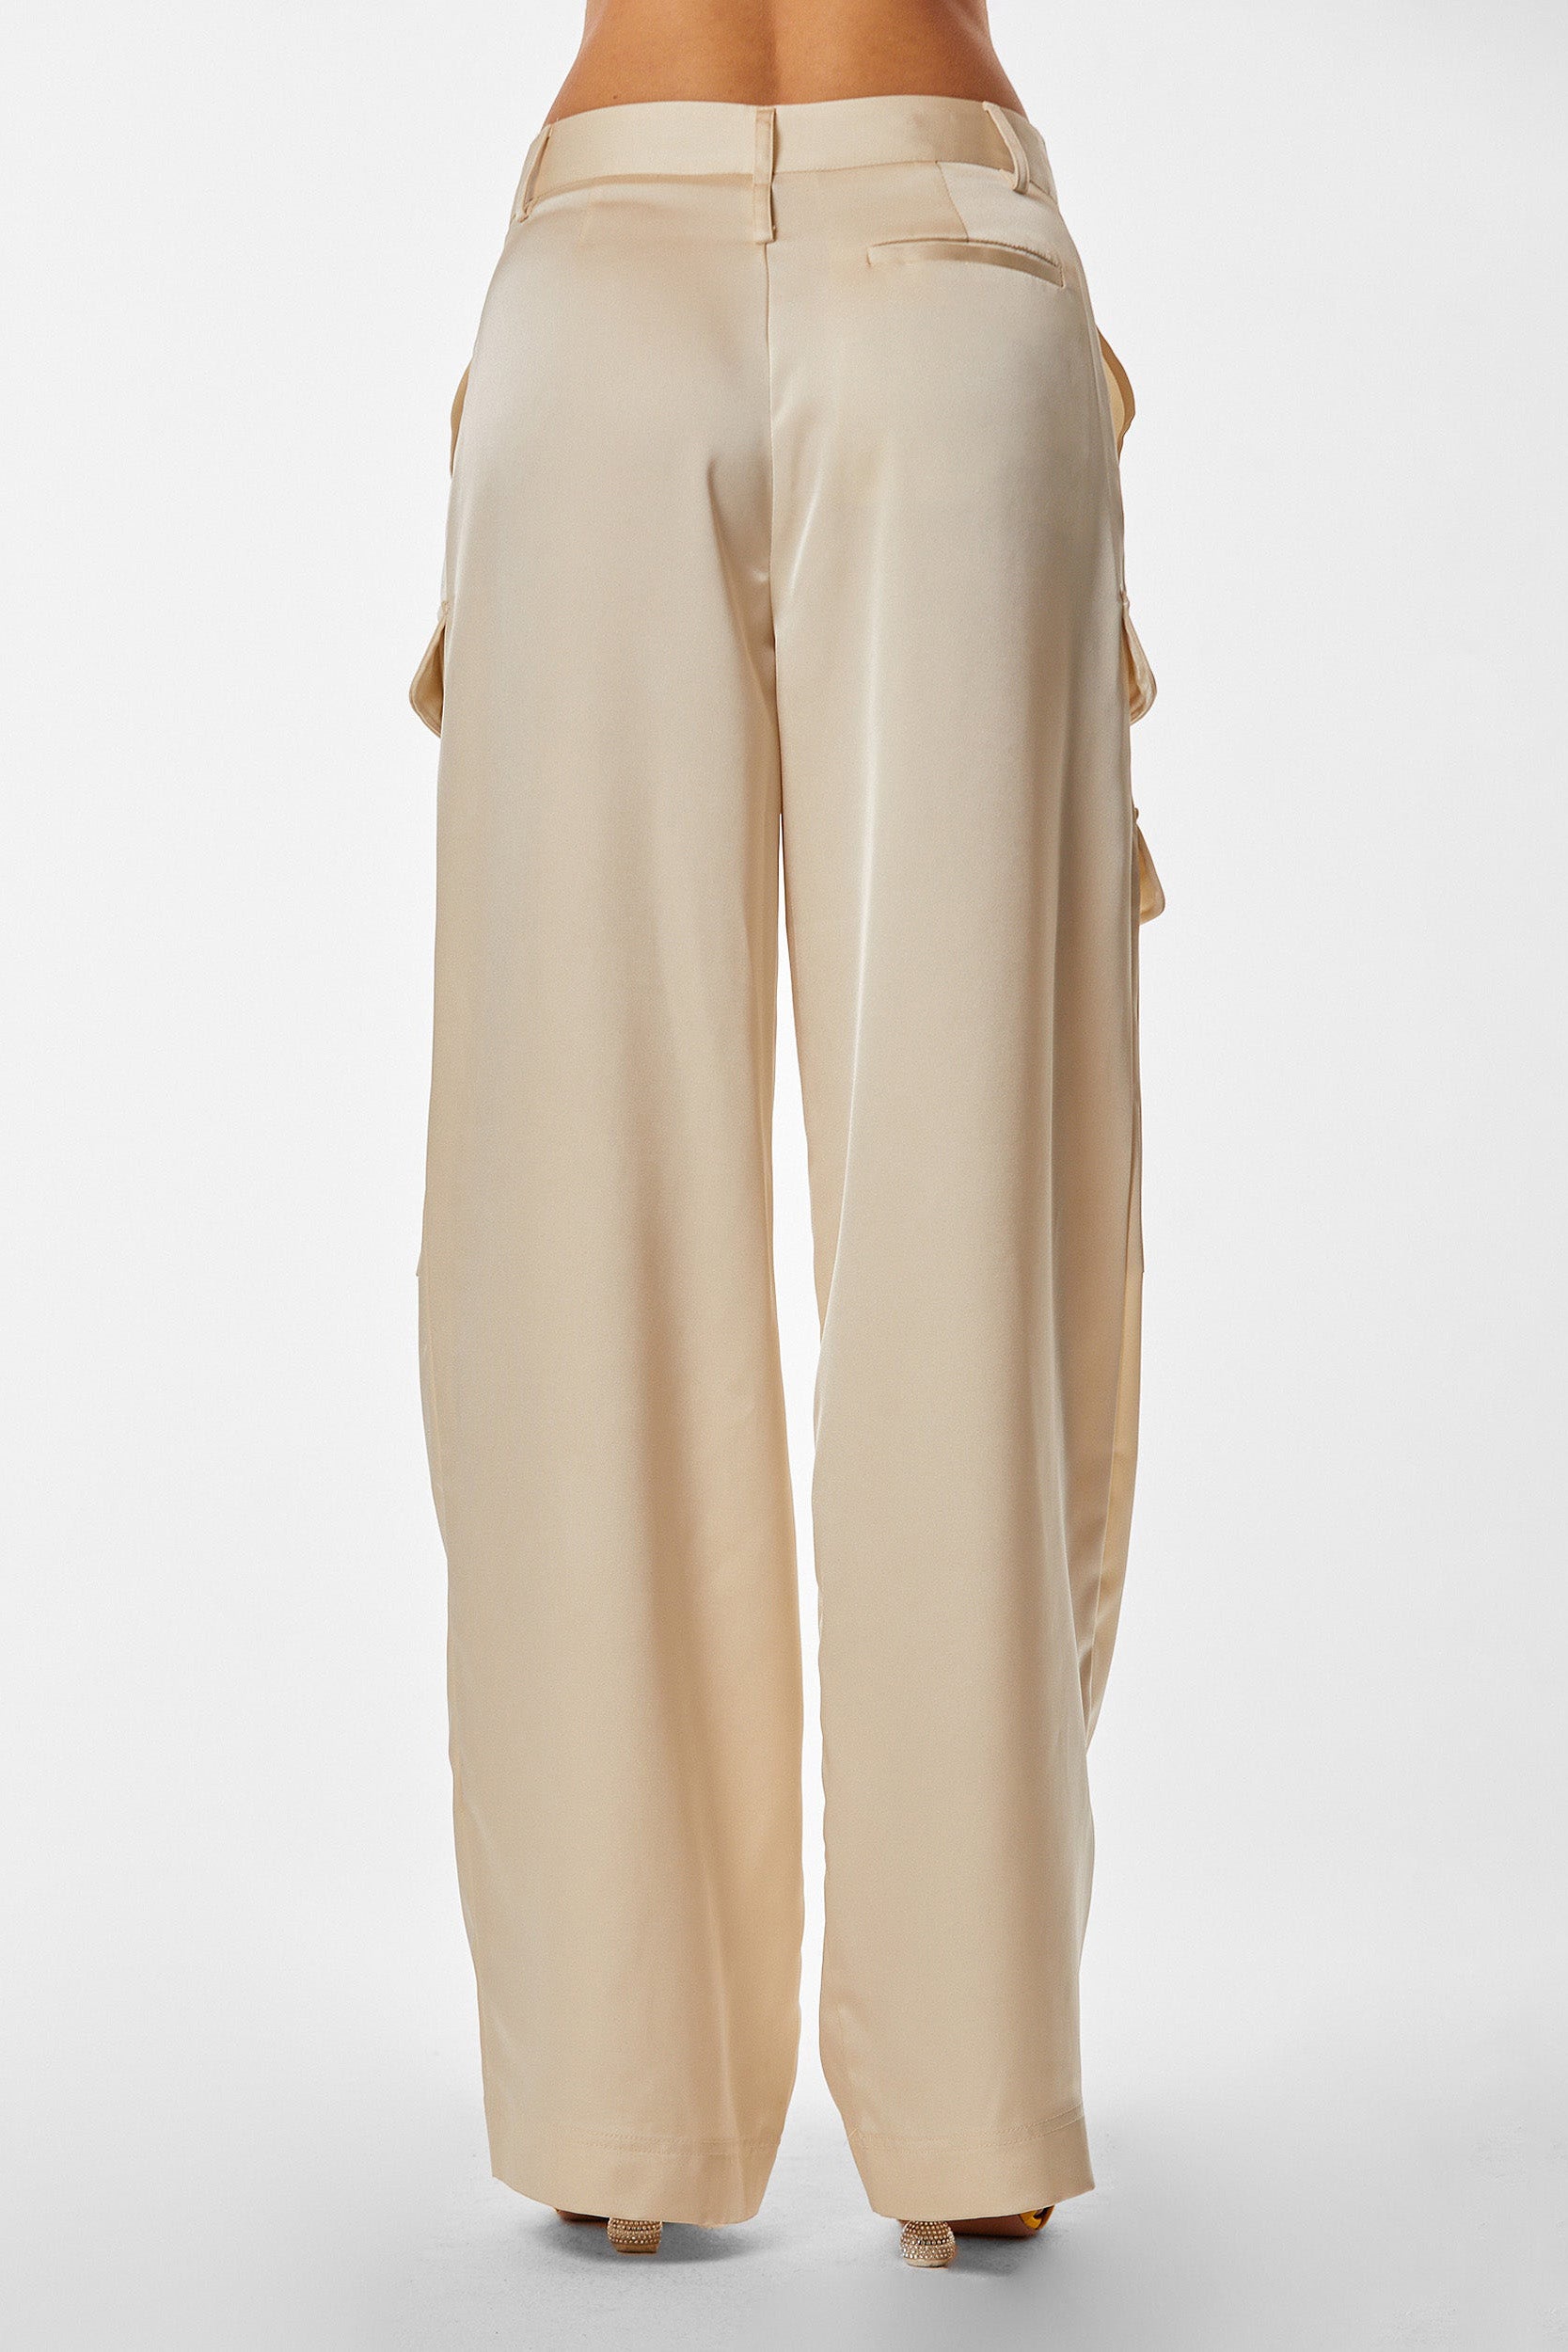 A person wearing high-waisted, wide-leg Milan Satin Cargo Pant in Pearl is shown from the back. The pants are made of a smooth satin-like fabric and have a relaxed fit with subtle pleats and pockets on the back. The background is a plain white studio setting.